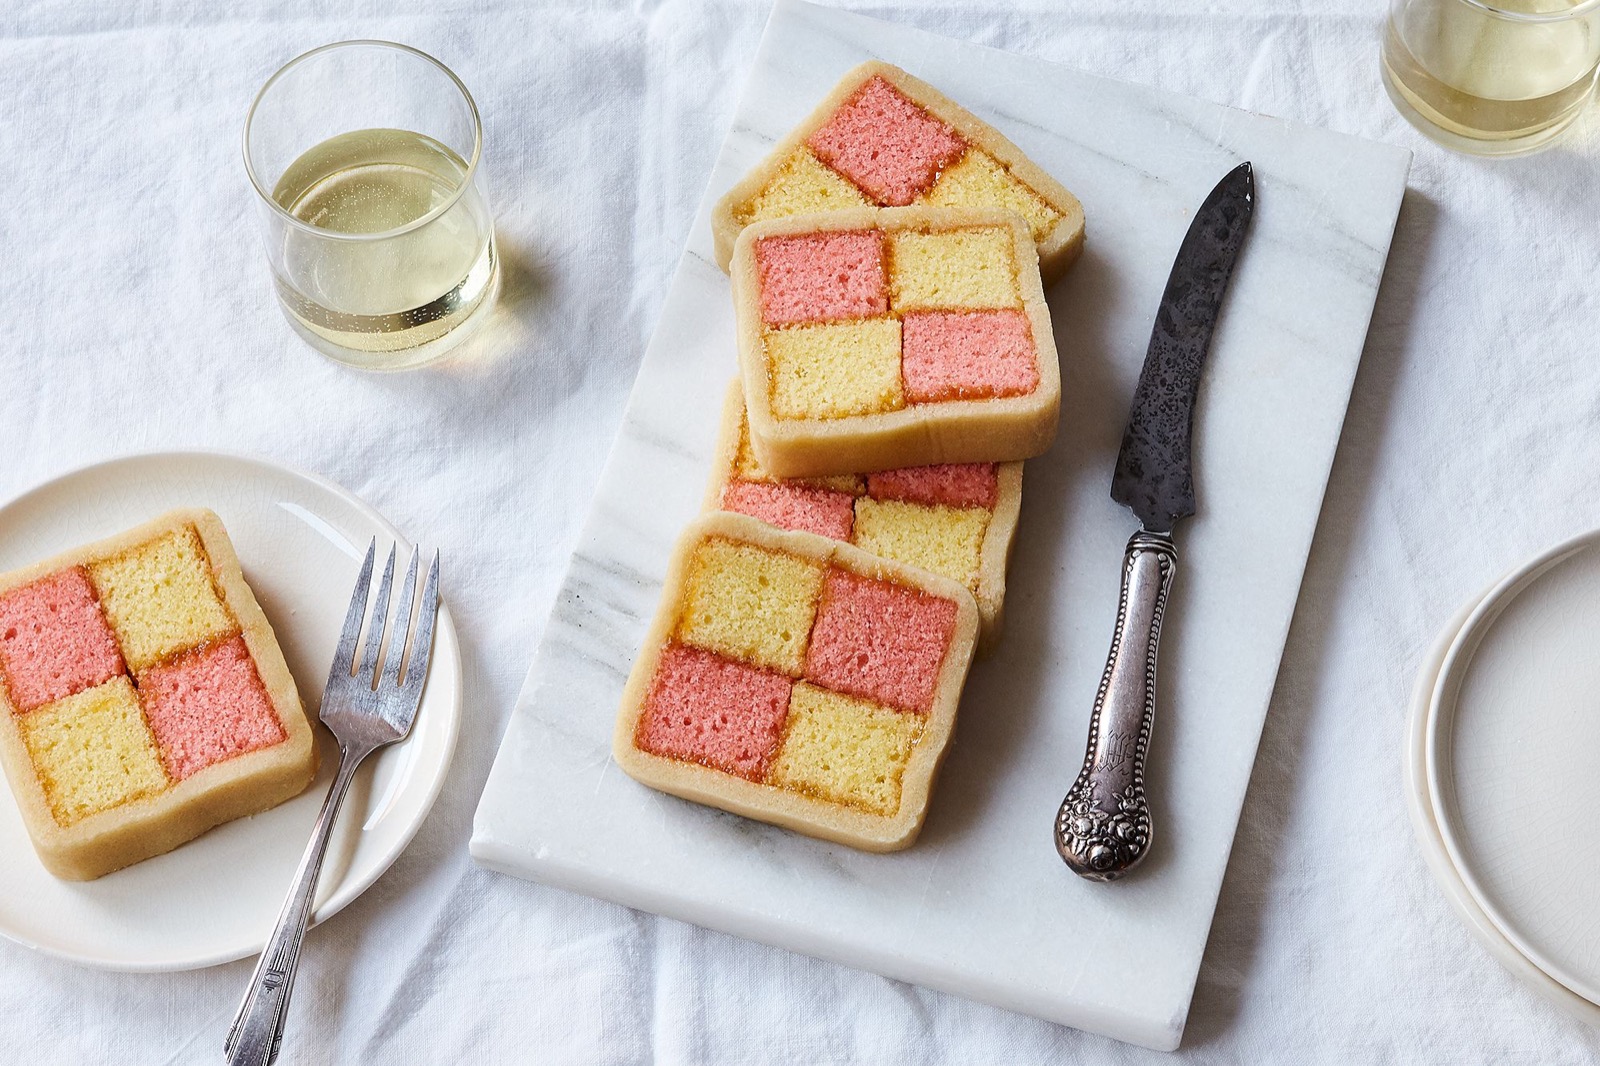 🌮 Eat an International Food for Every Letter of the Alphabet If You Want Us to Guess Your Generation Battenberg cake